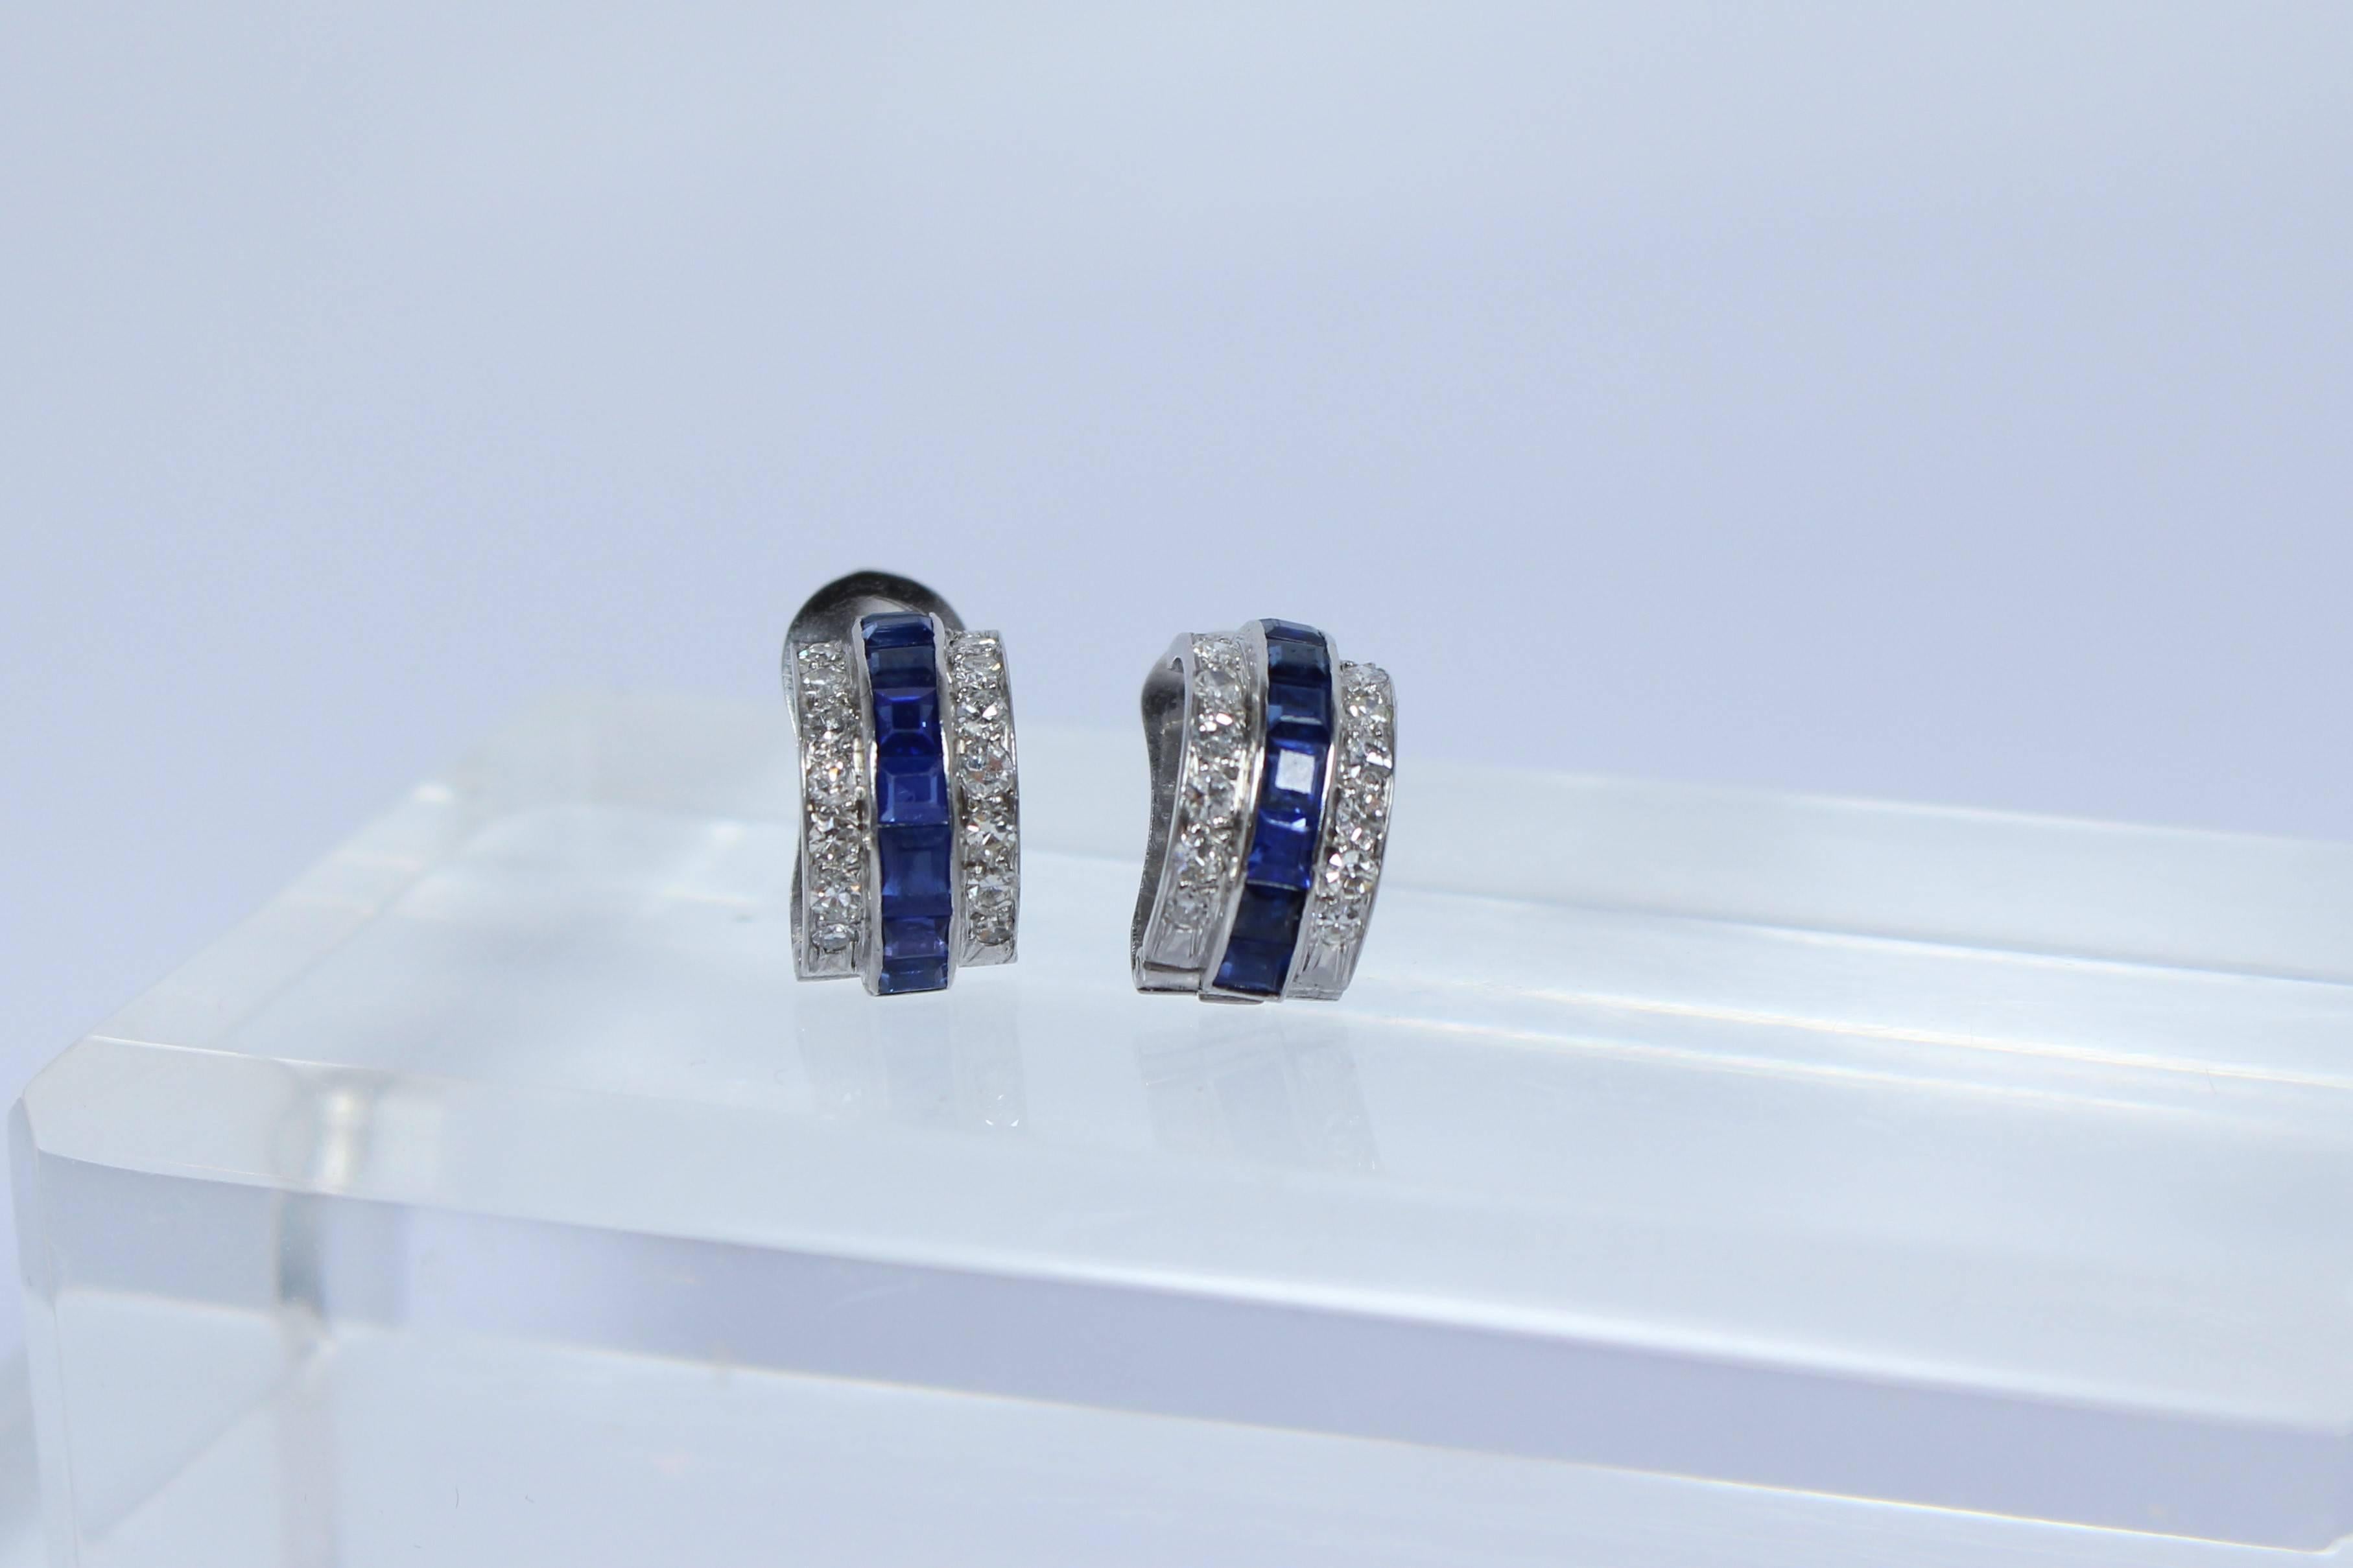 These earrings are composed of 14KT with sapphires and diamonds. There is a tension back with post. In excellent vintage condition.

Specs: 
14KT White Gold
16 - Blue Emerald Cut Sapphires Approximately 0.08 Carats 
28 - Single Cut Diamonds